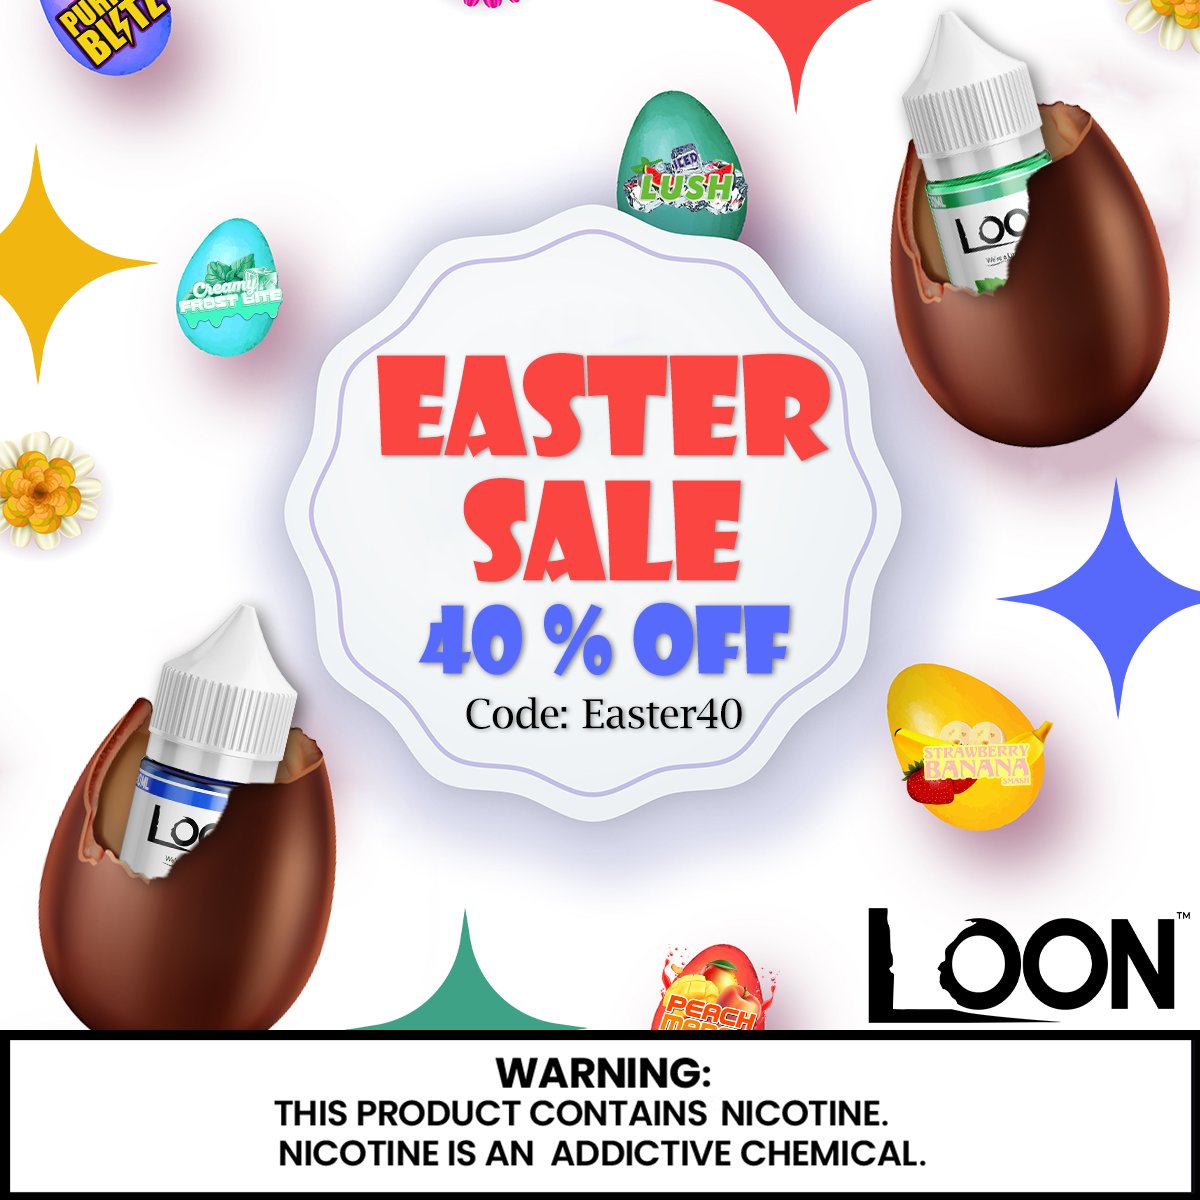 Use code EASTER40 for 40% off your order now through 4/30/23.

Must be 21+ to order
theloonmn.com

#easter #sale #discountcode #promo #egg #holiday #loon #loonmaxx #easterbasket #theloonmn #peachmango #lushice #purpleblitz #creamyfrostbite #nicotine #warning #21plus